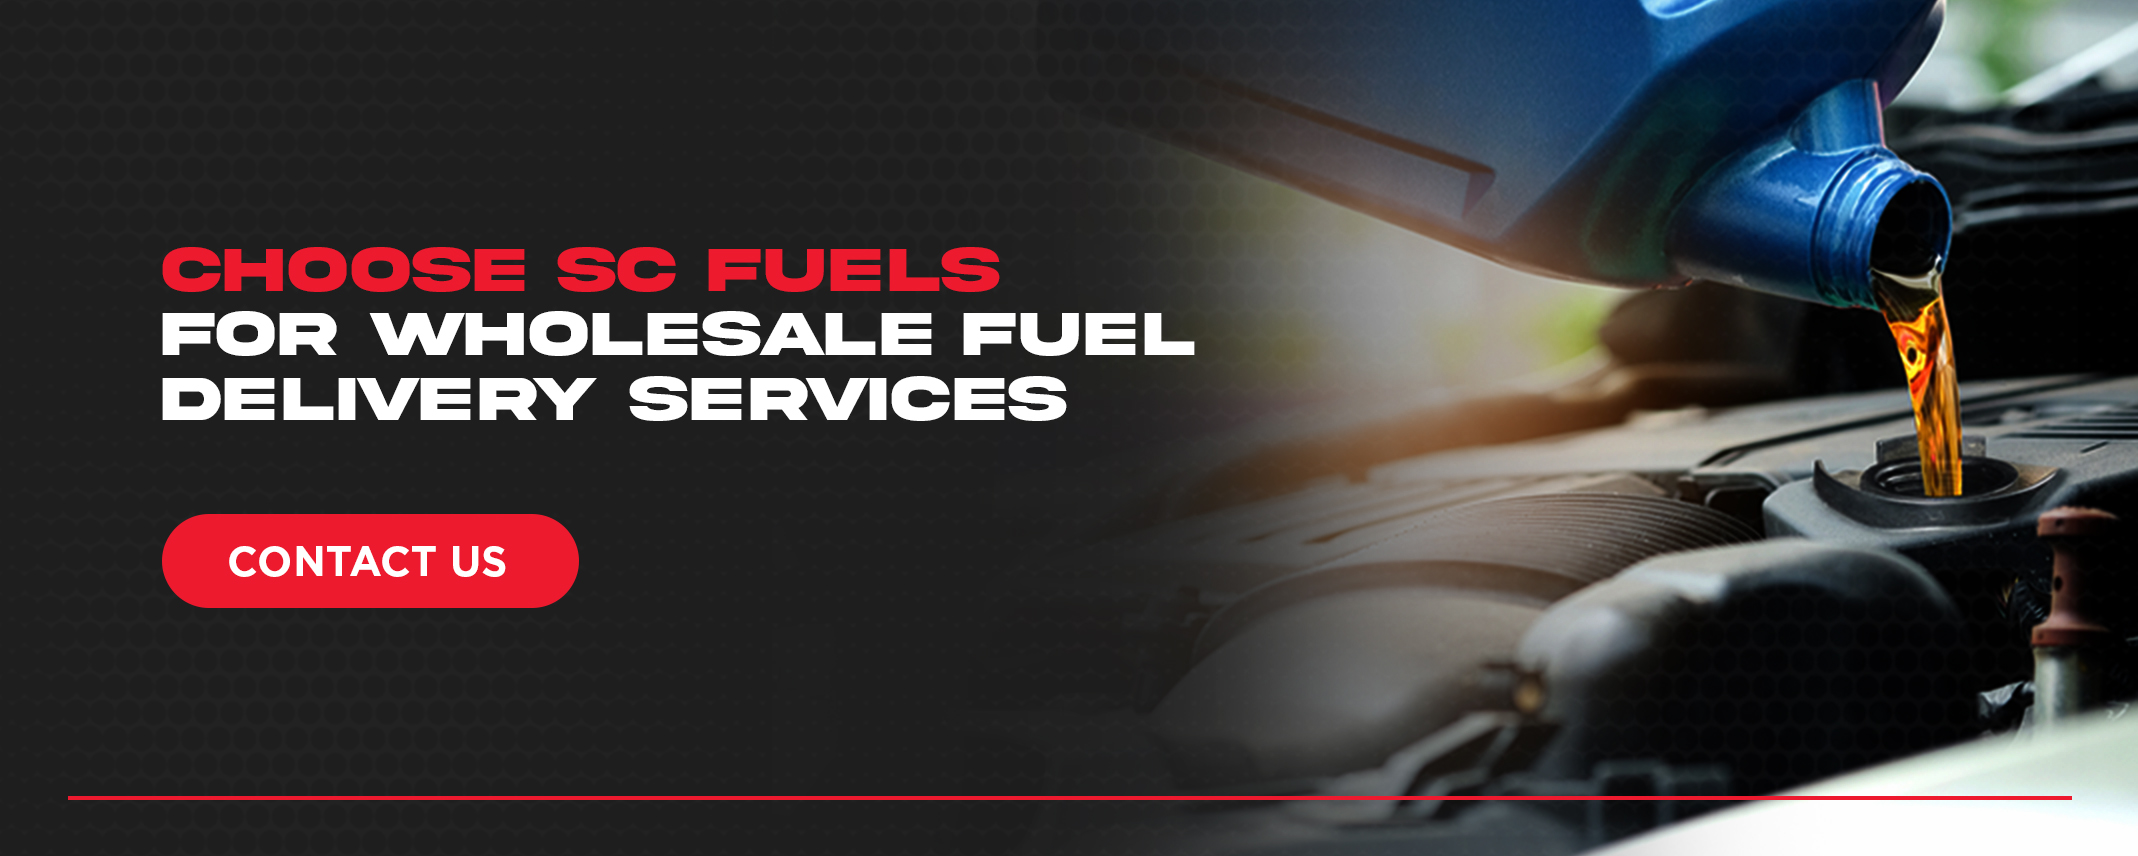 Contact SC Fuels for wholesale fuel delivery services